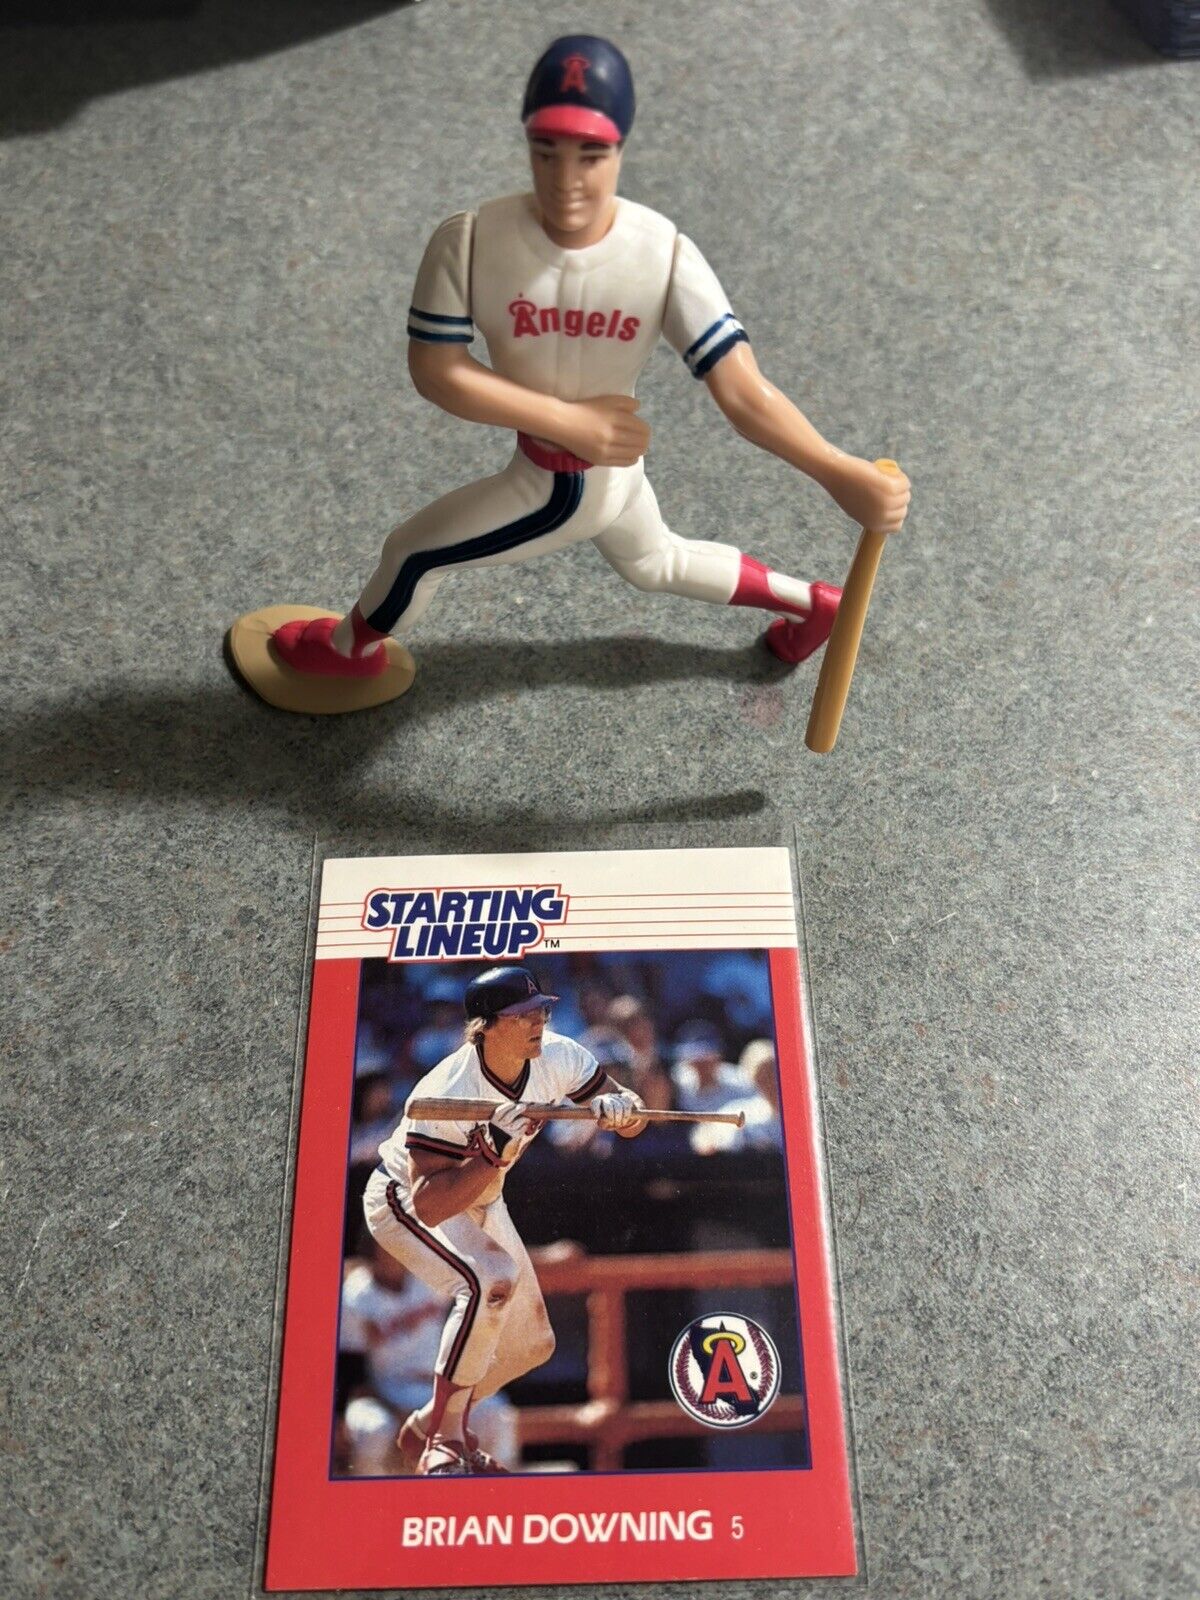 1988 Kenner Starting Lineup BRIAN DOWNING SLU OPEN FIGURE WITH CARD